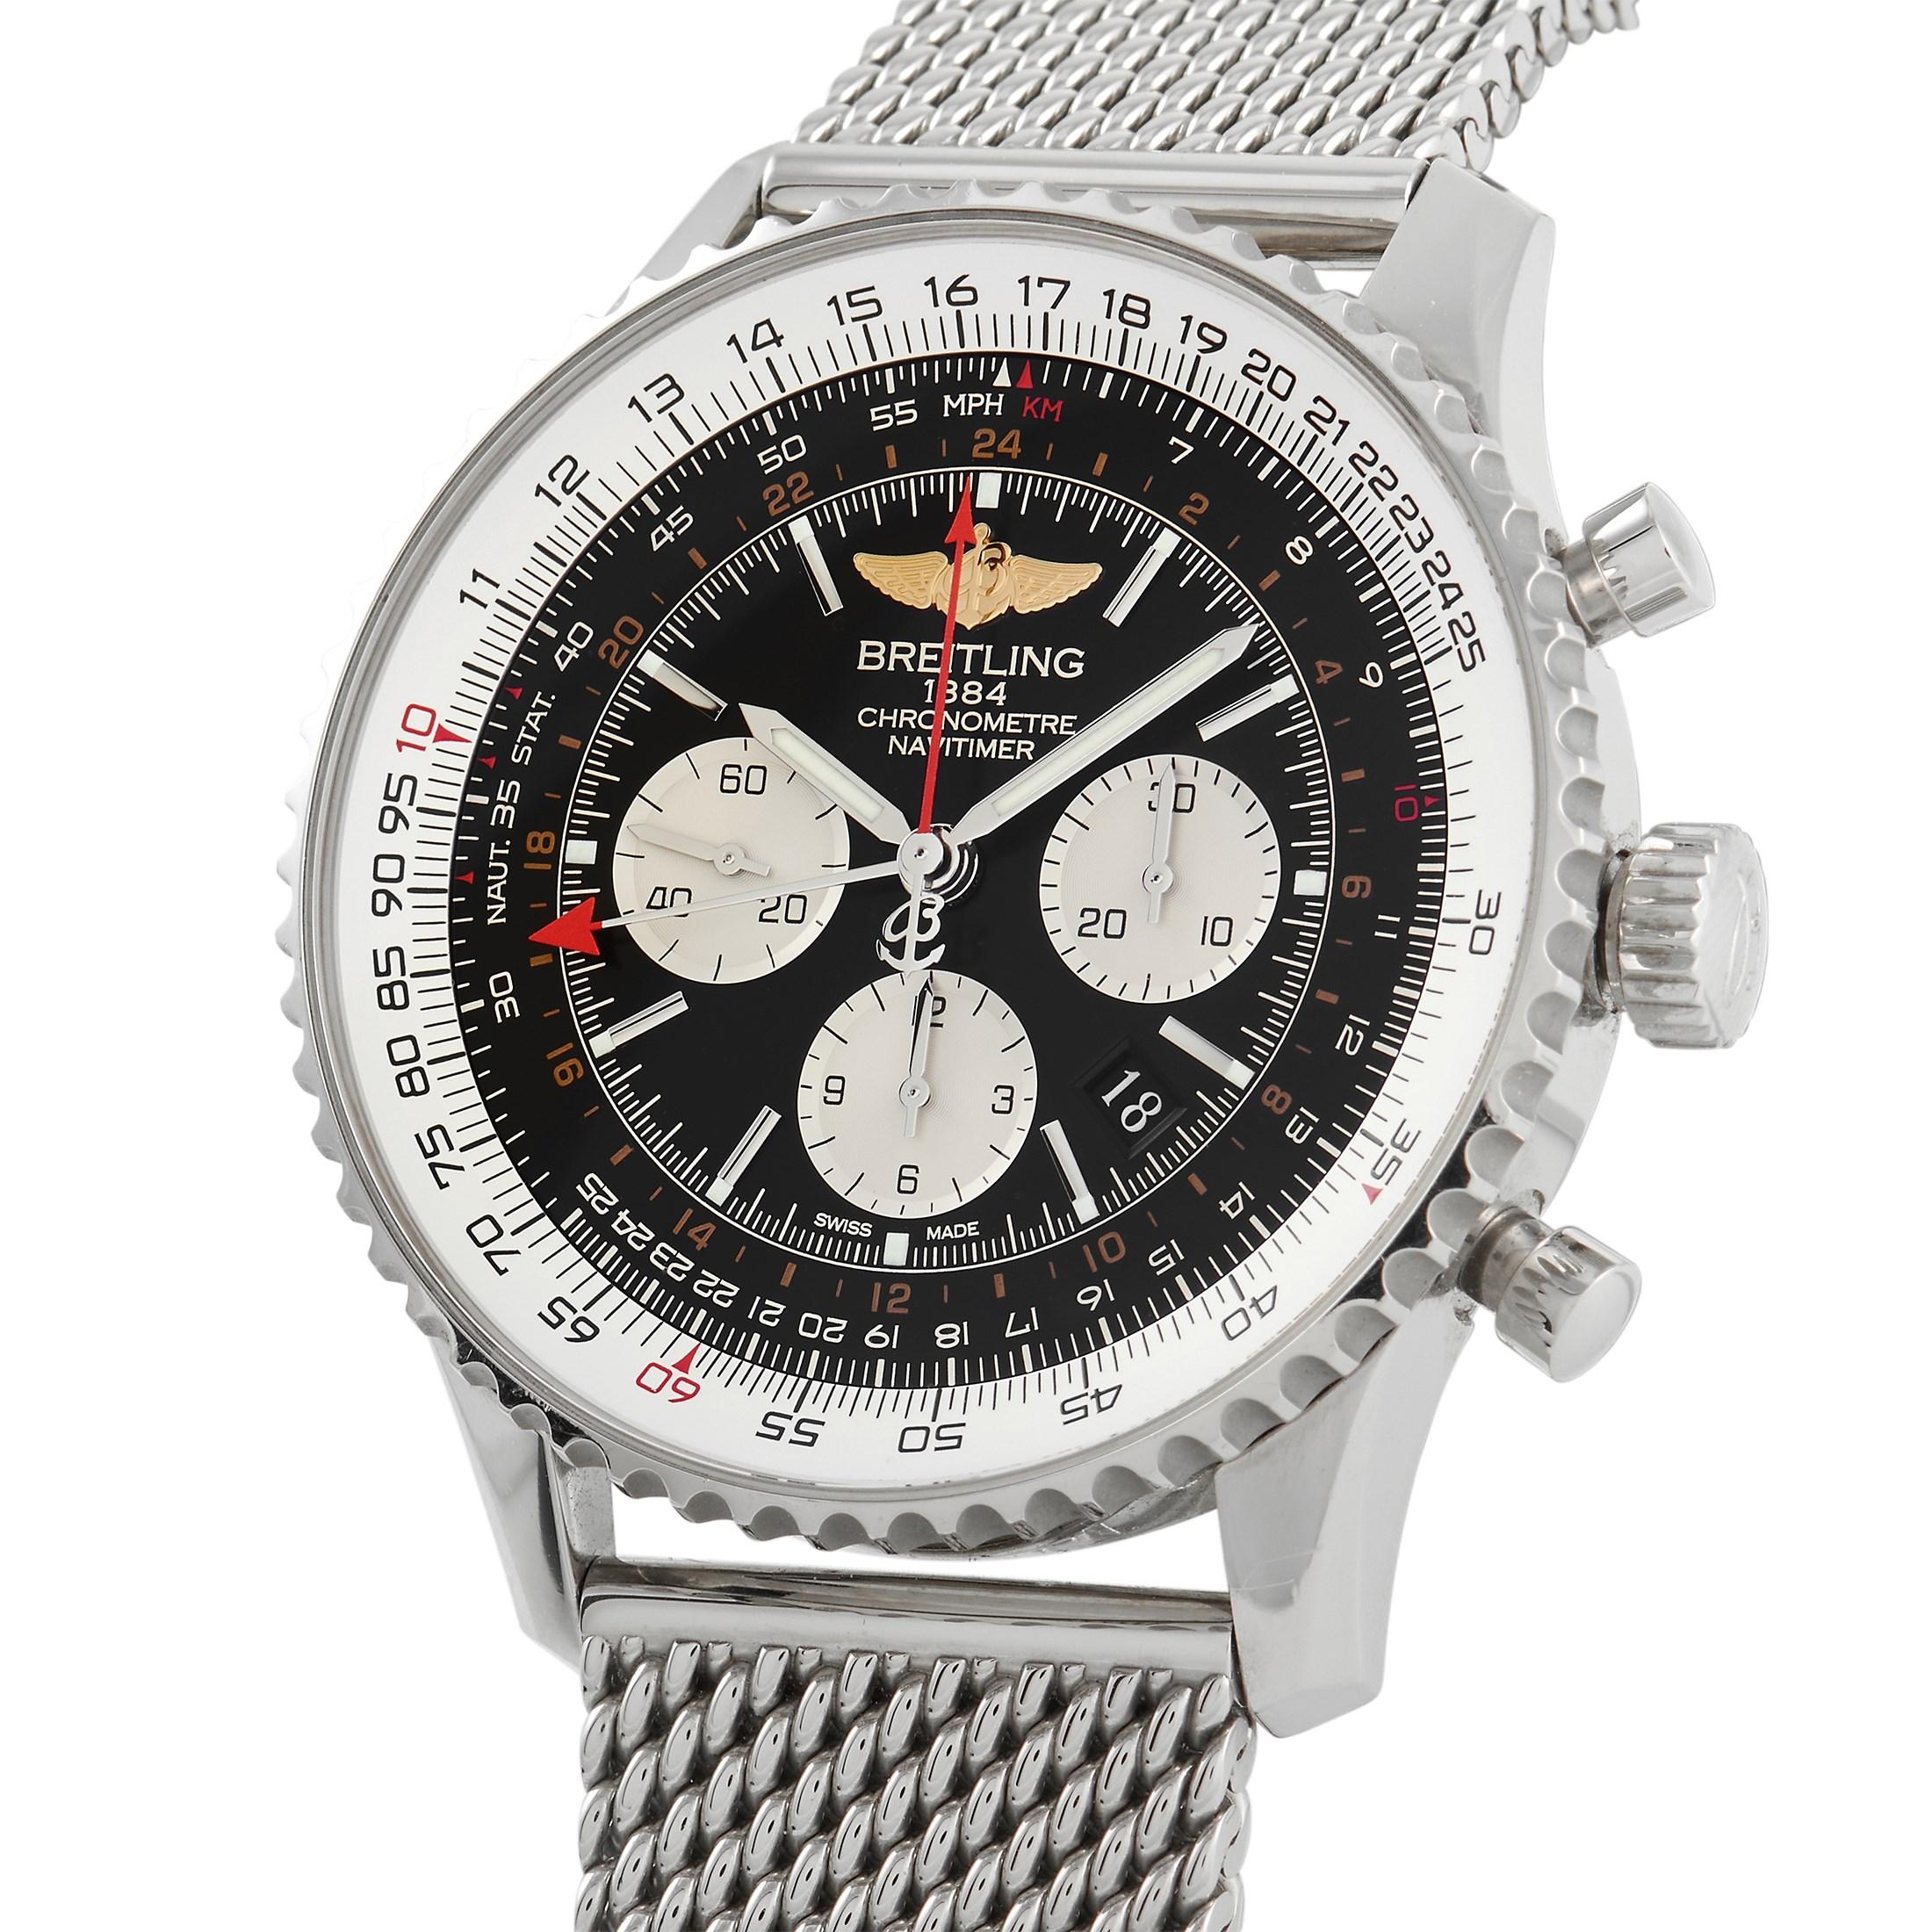 The Breitling Navitimer B04 Chronograph GMT 48 Automatic Watch AB0441 is perfect for a traveler. This timepiece has an imposing case measuring 48mm in diameter in stainless steel. It features an exceptionally legible 